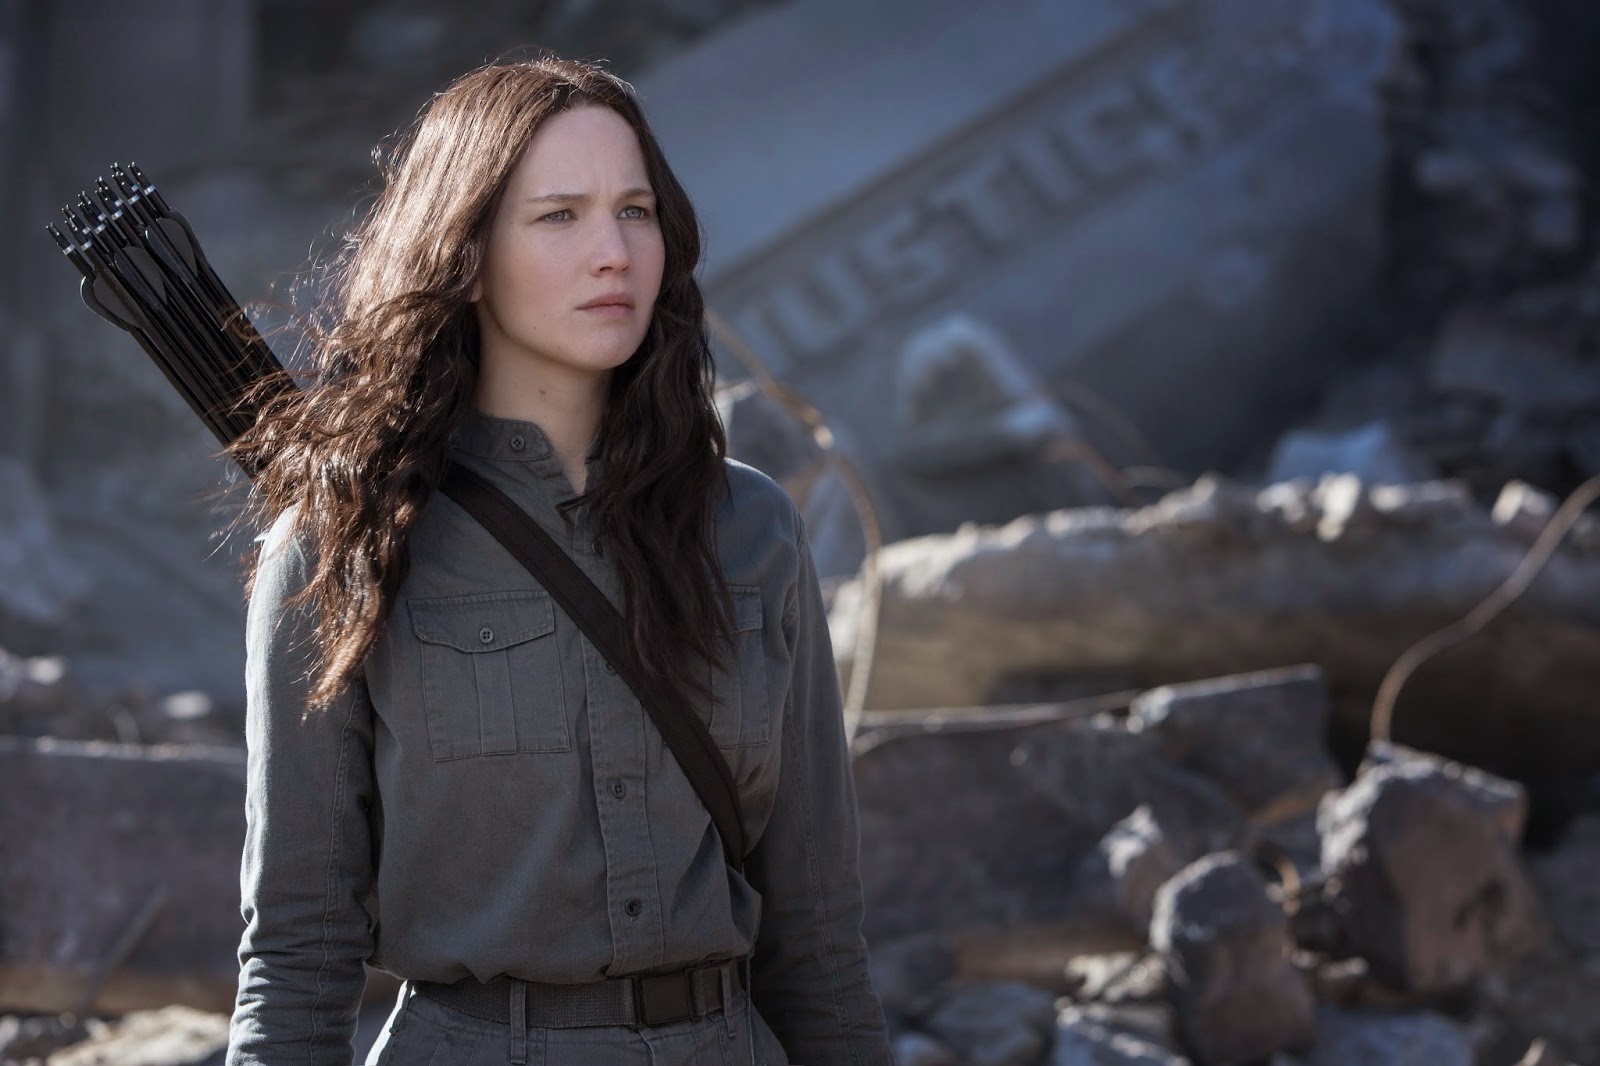 OFFICIAL: New Stills from 'The Hunger Games: Mockingjay Part 1' featuring Katniss, Haymitch, Boggs & MORE